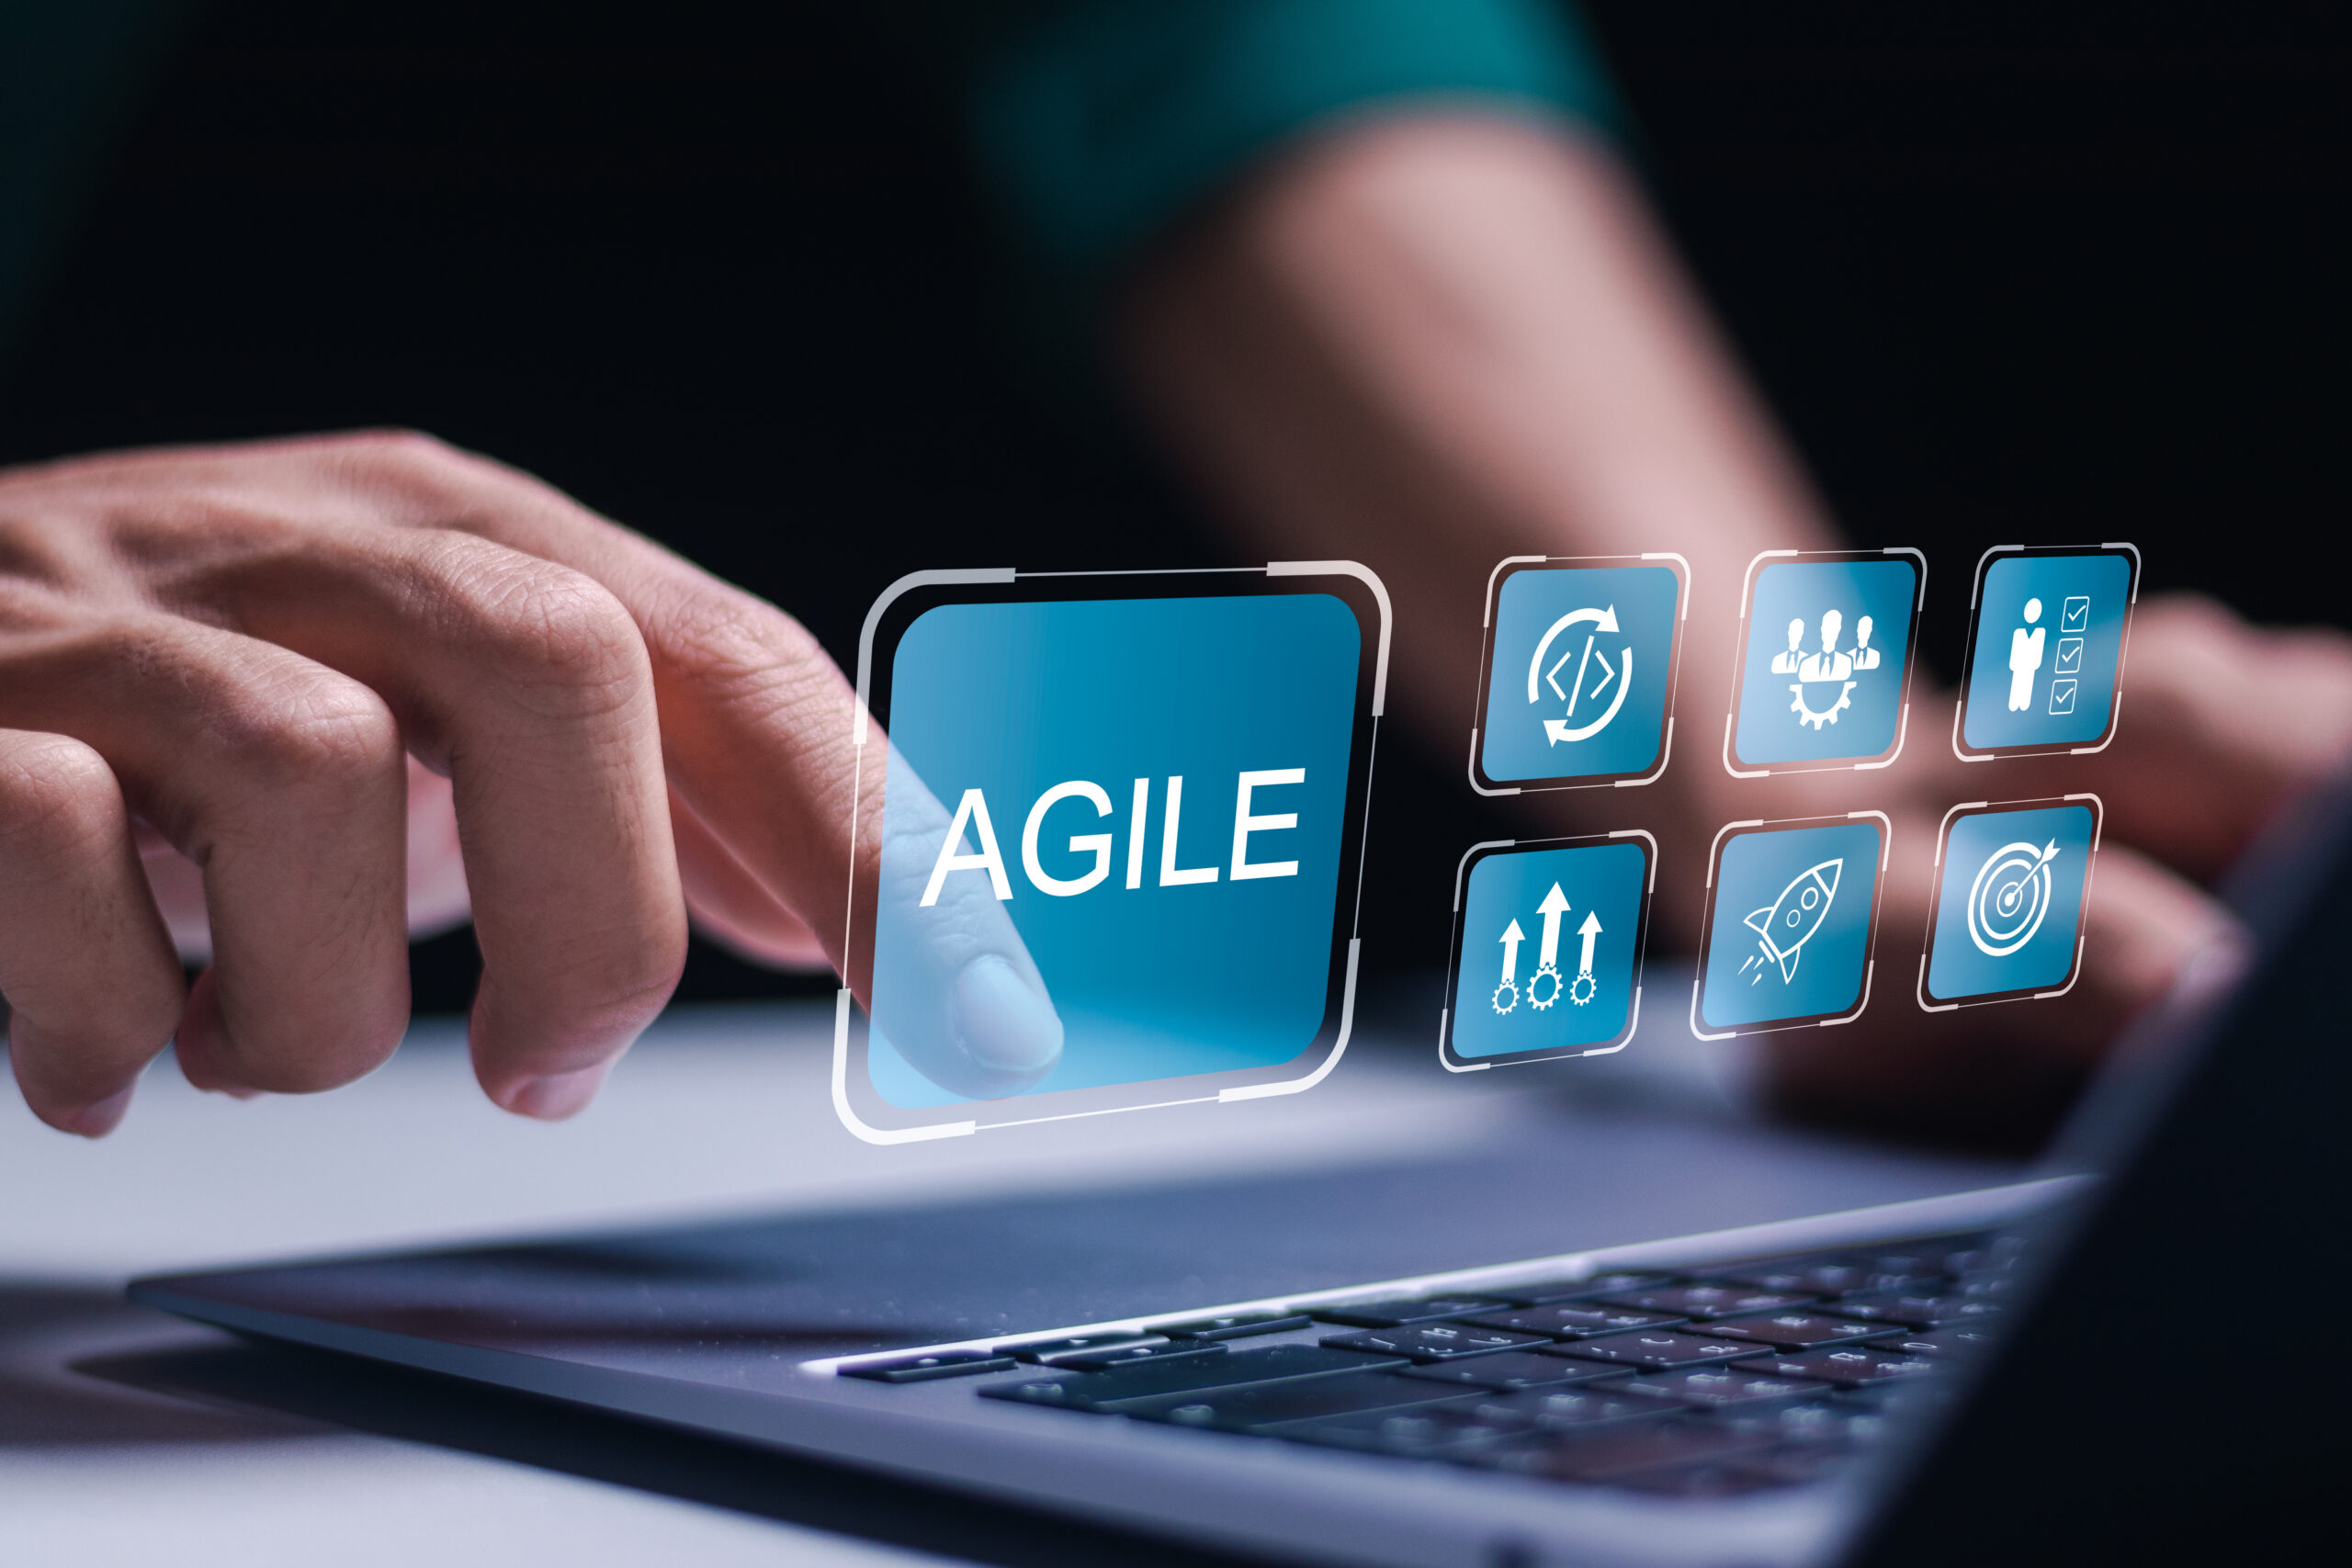 Agile development methodology, businessman use laptop with virtual screen of agile icon for process that will help you work faster By reducing step-by-step work and focusing on team communication.